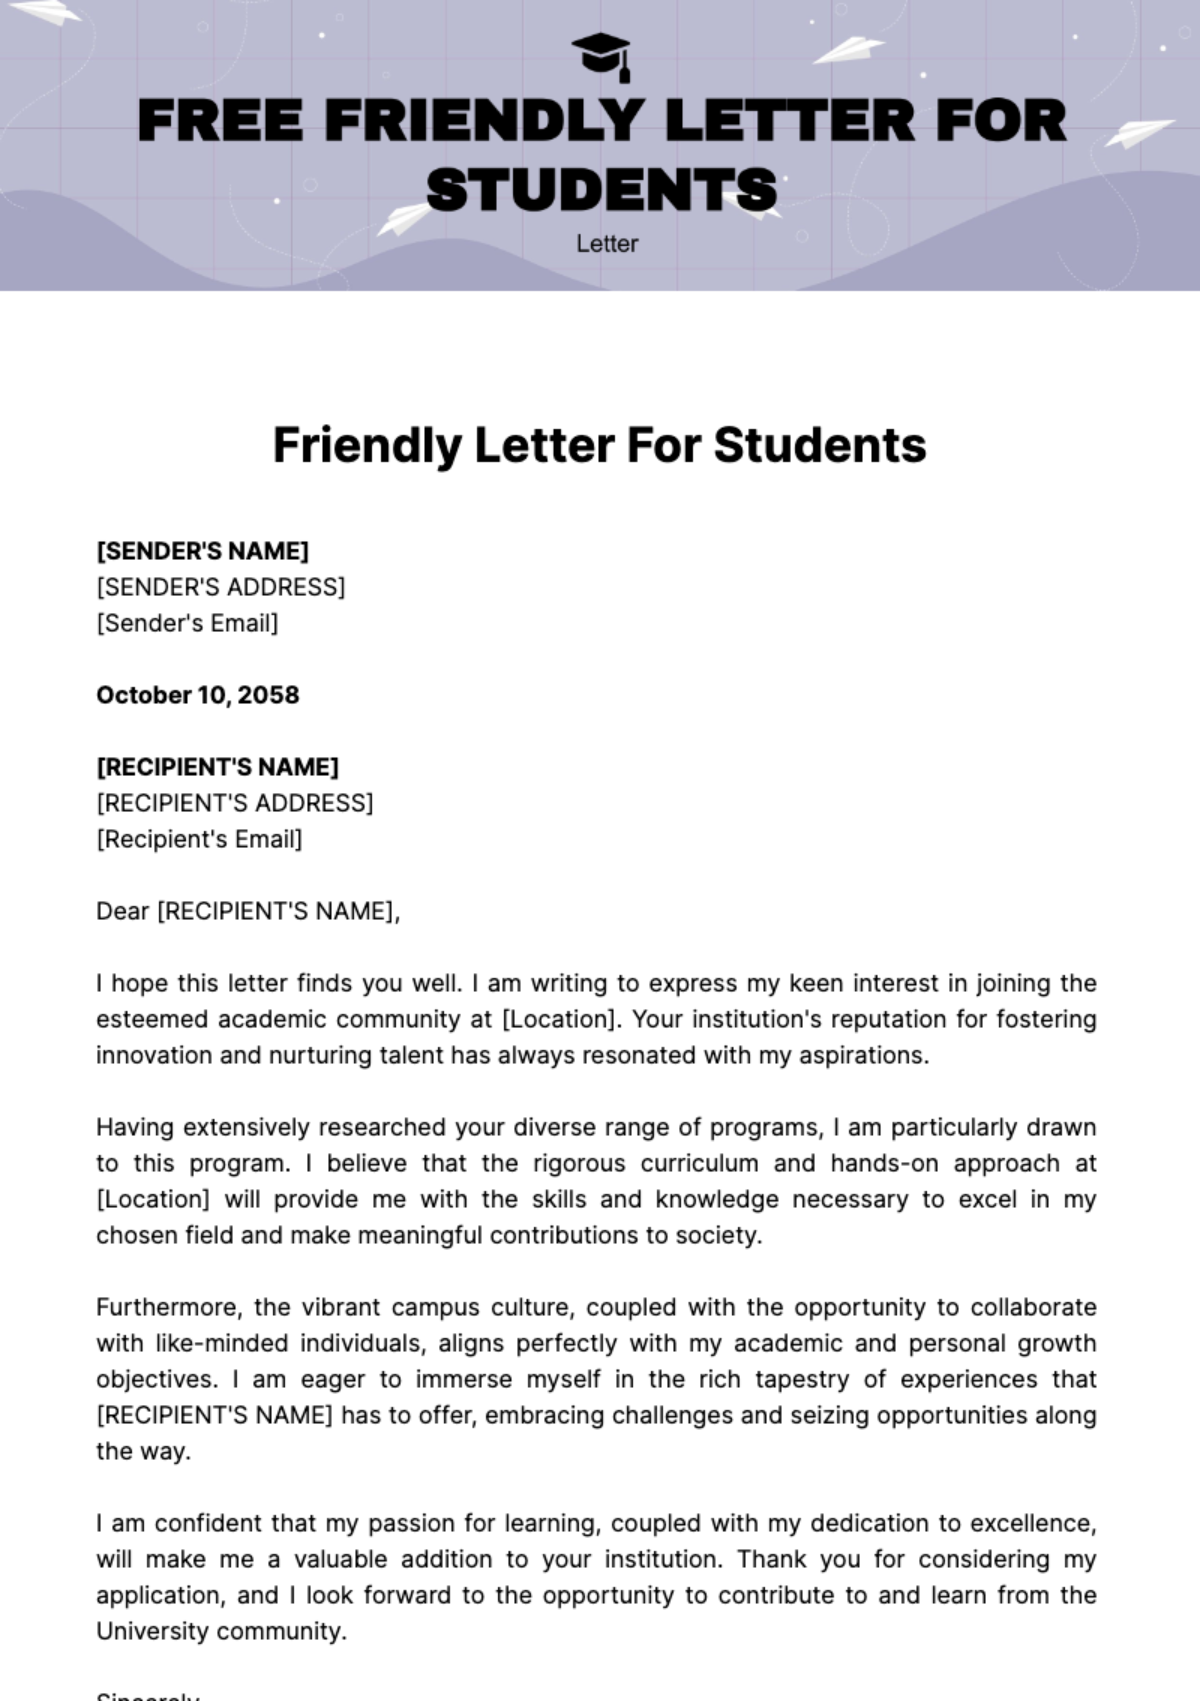 Friendly Letter for Students Template